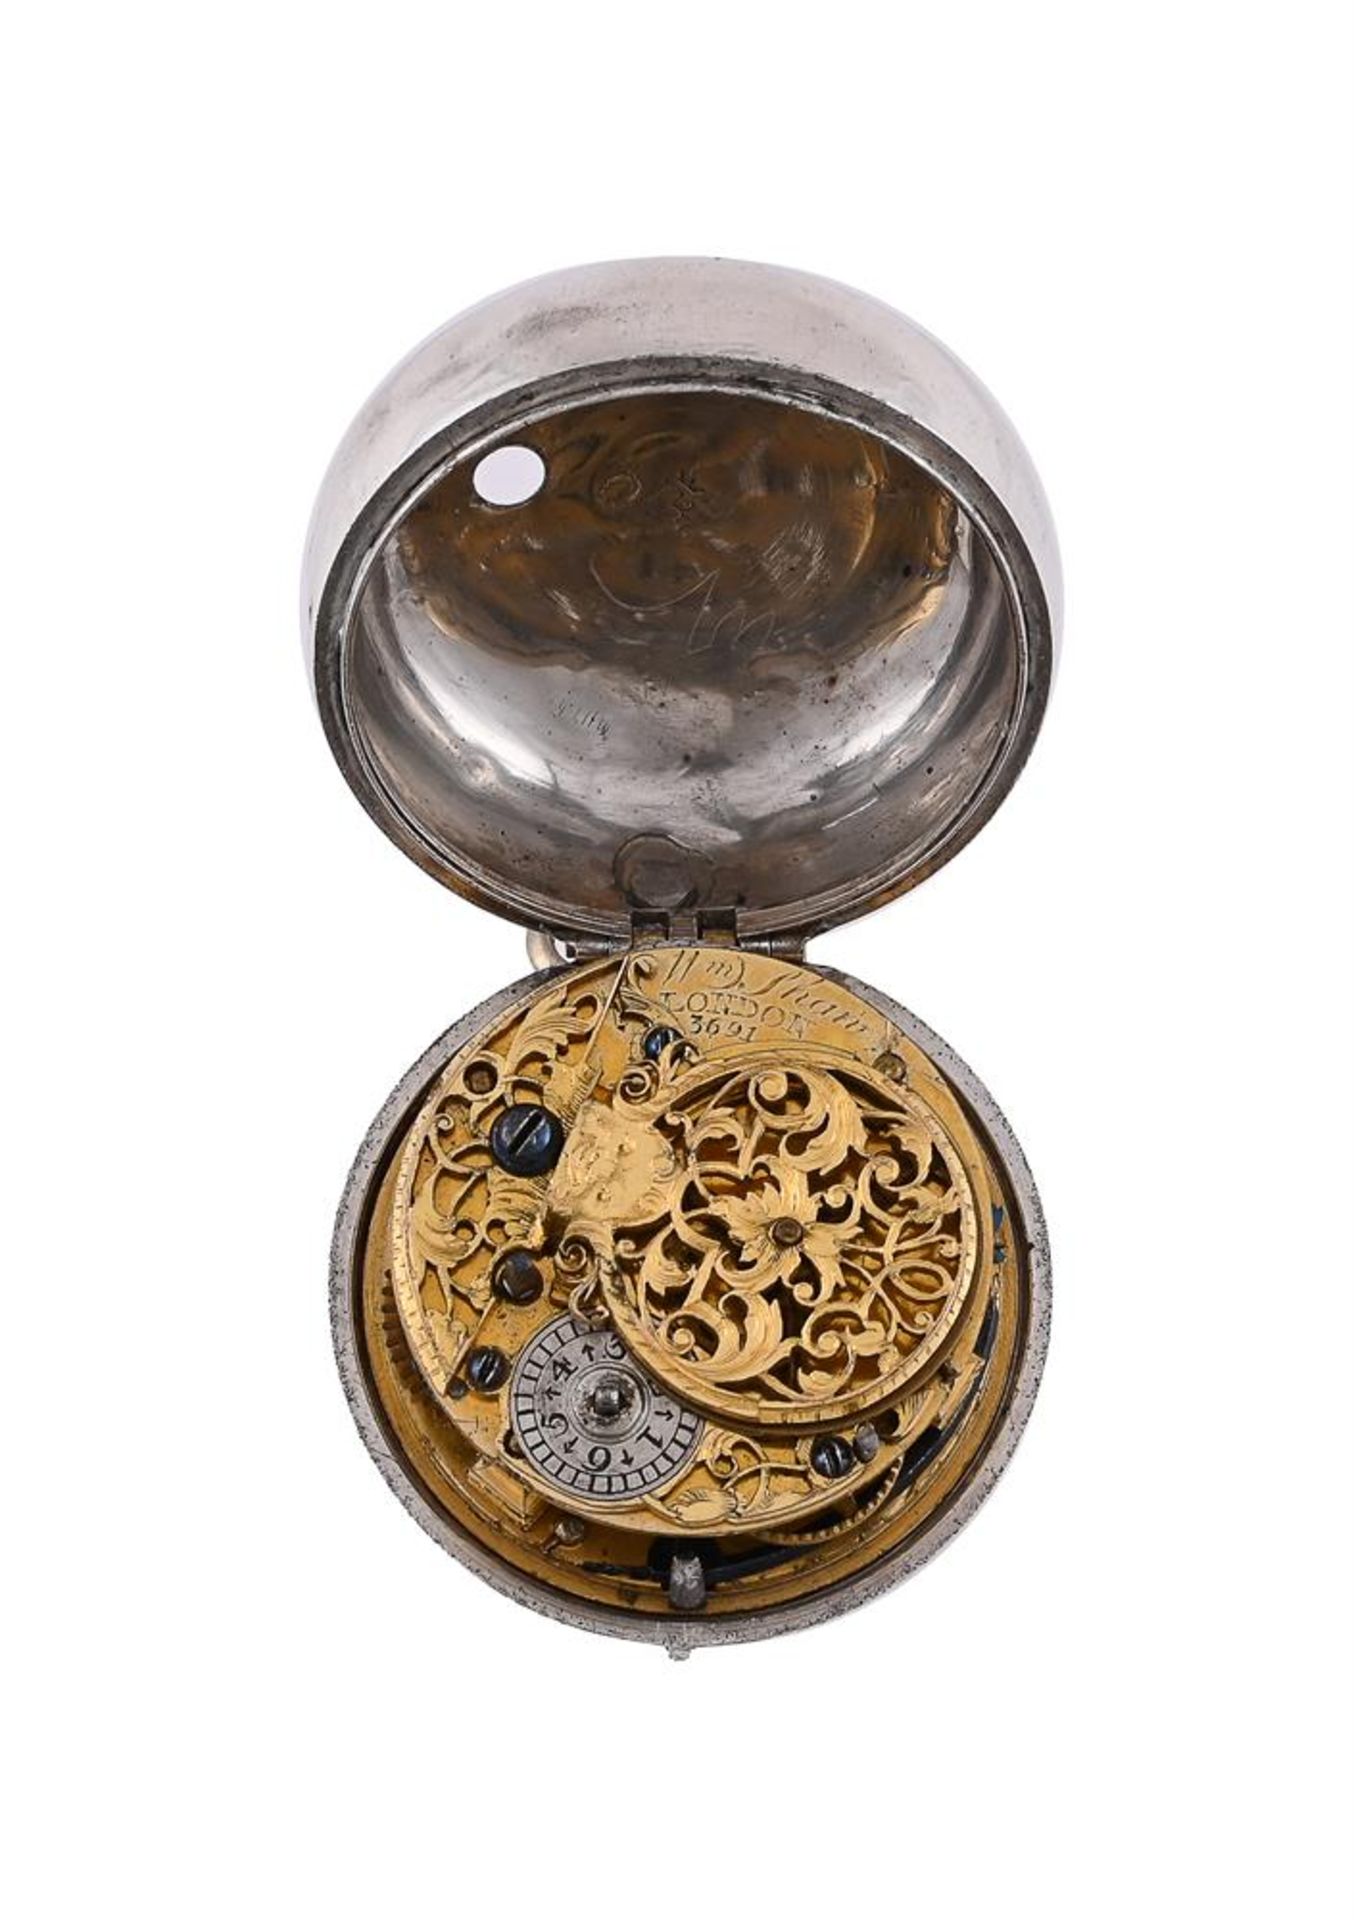 A GEORGE II SILVER PAIR-VASED VERGE POCKET WATCH WITH CHAMPLEVE DIAL - Image 3 of 3